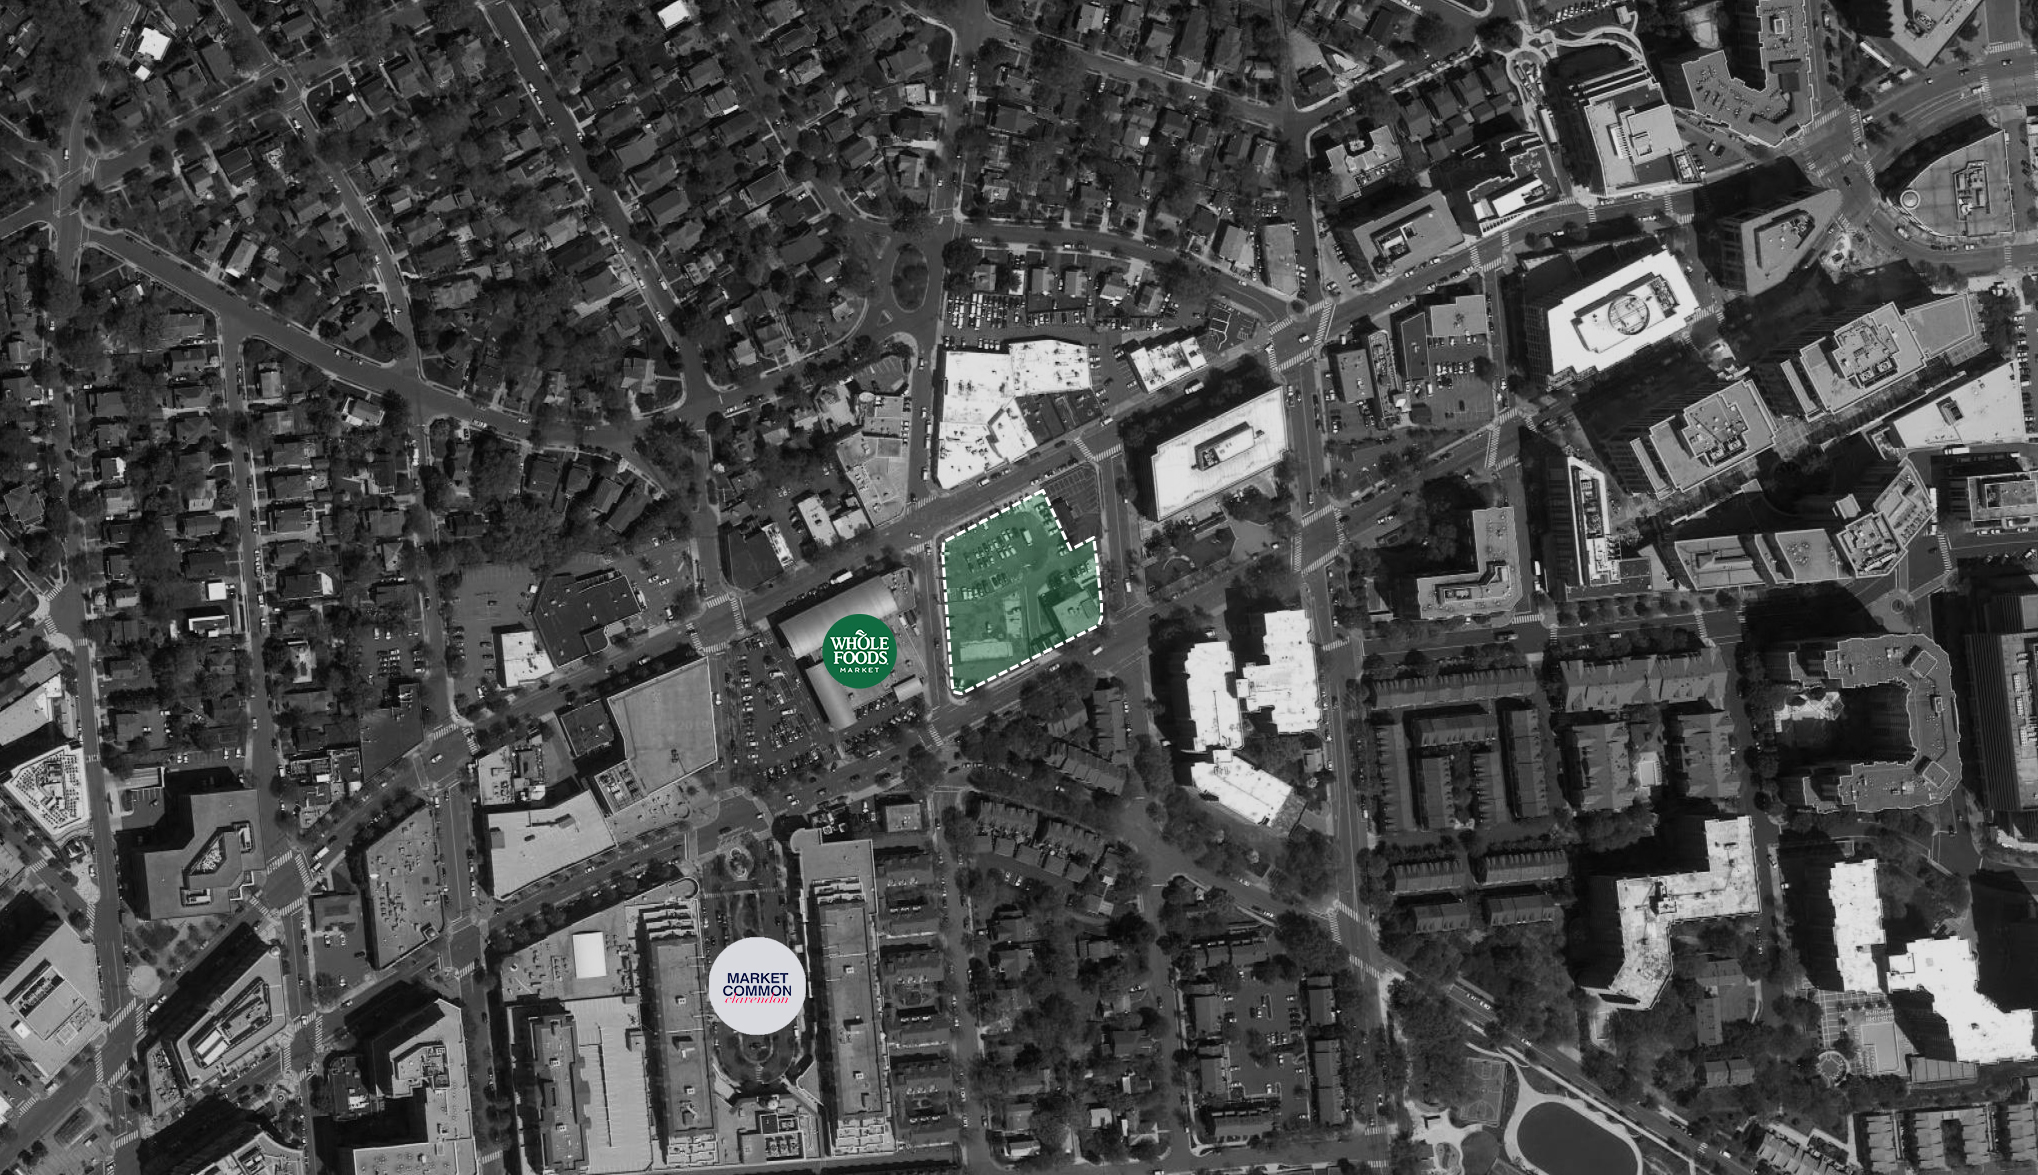 Courthouse West Aerial Map High Res - Darkened + Logos2.jpg